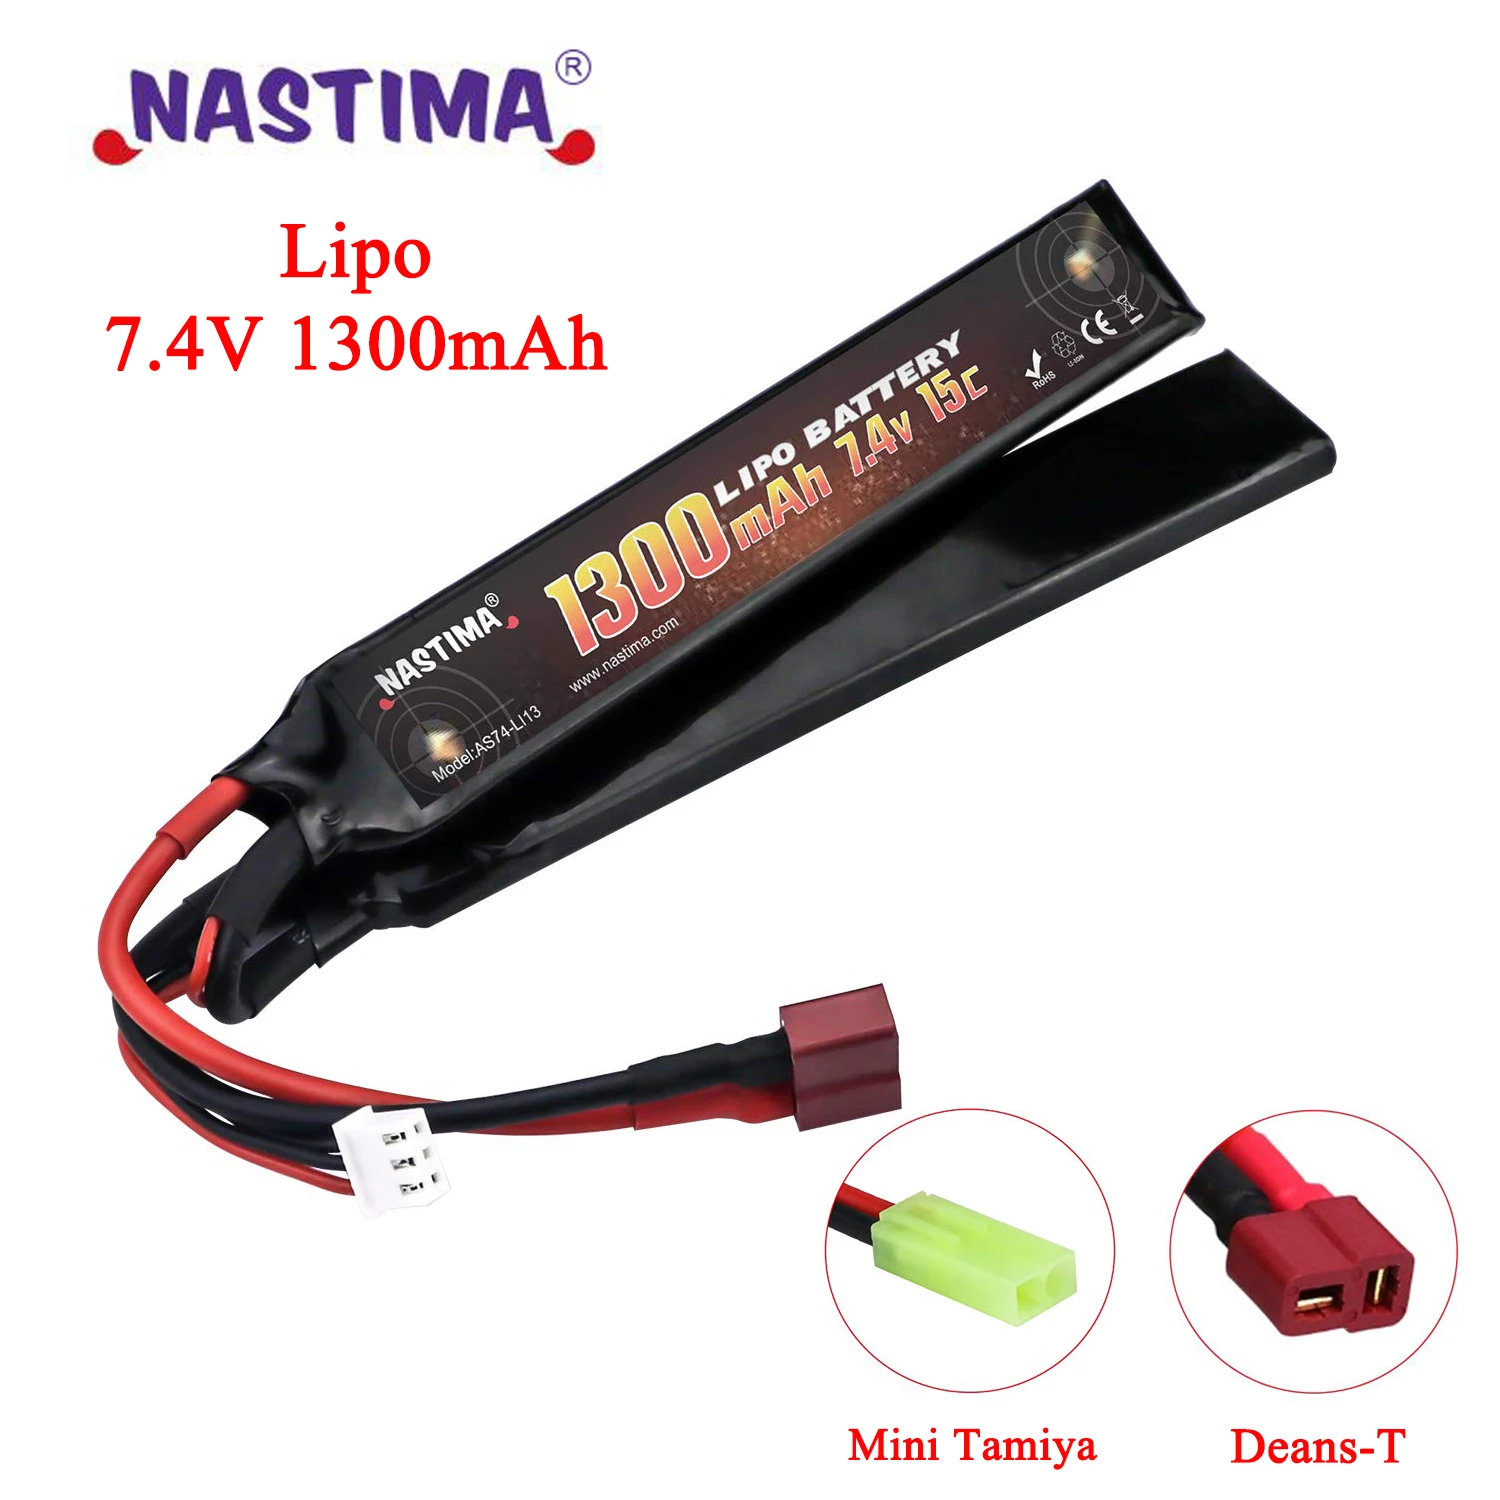 NASTIMA 7.4V 1300mAh Airsoft Lipo Battery, 2S 15C Nunchuck-style Battery Pack with Mini Tamiya/Deans-T Plug for Airsoft Guns